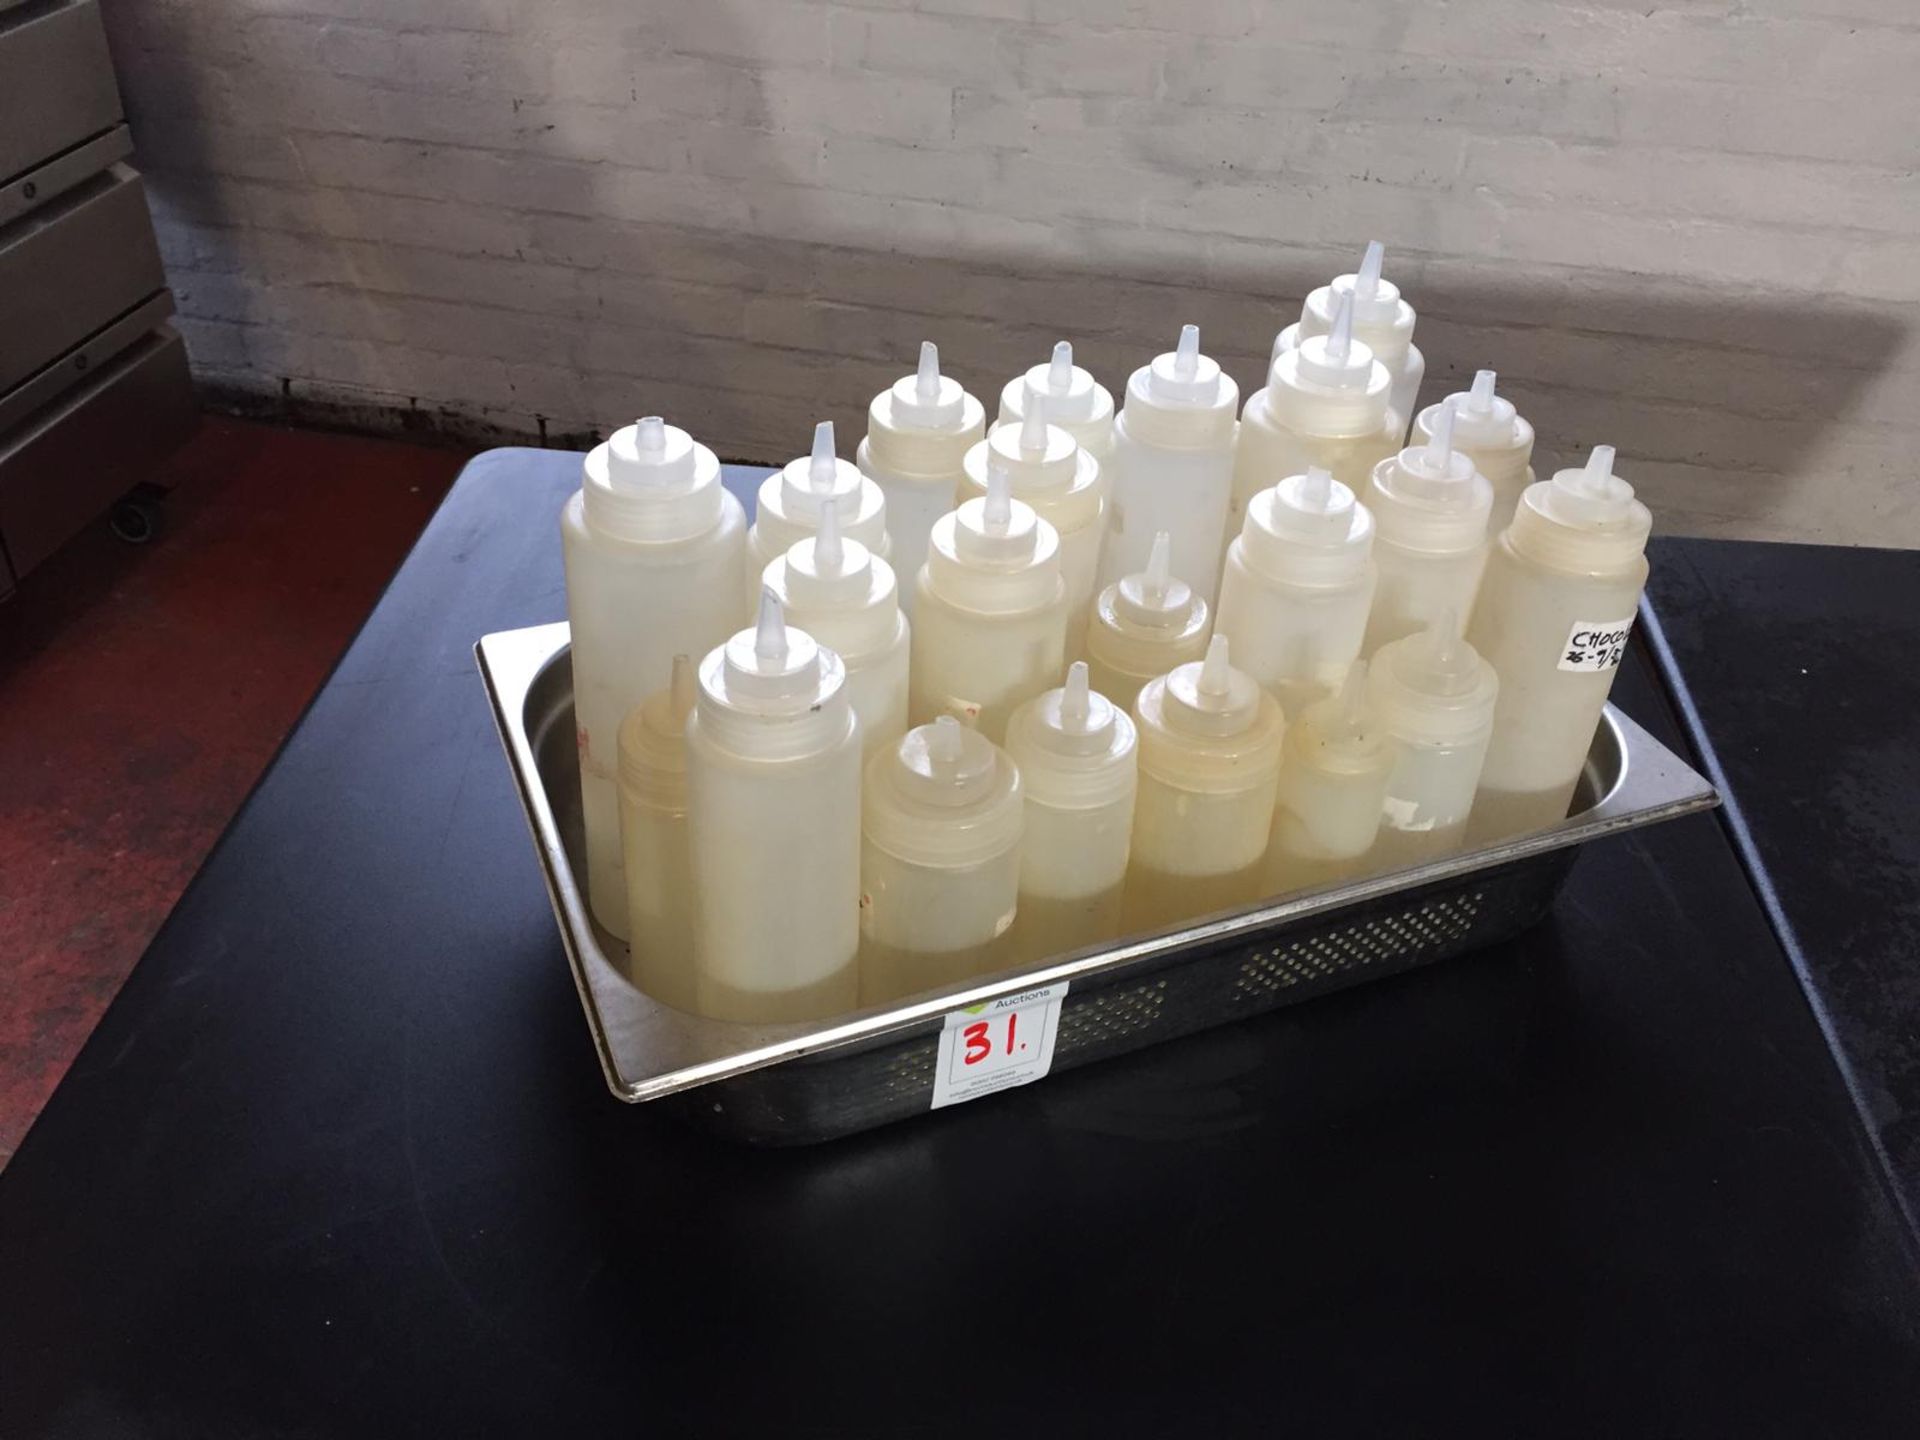 Stainless Steel Tray Containing Sauce Bottles